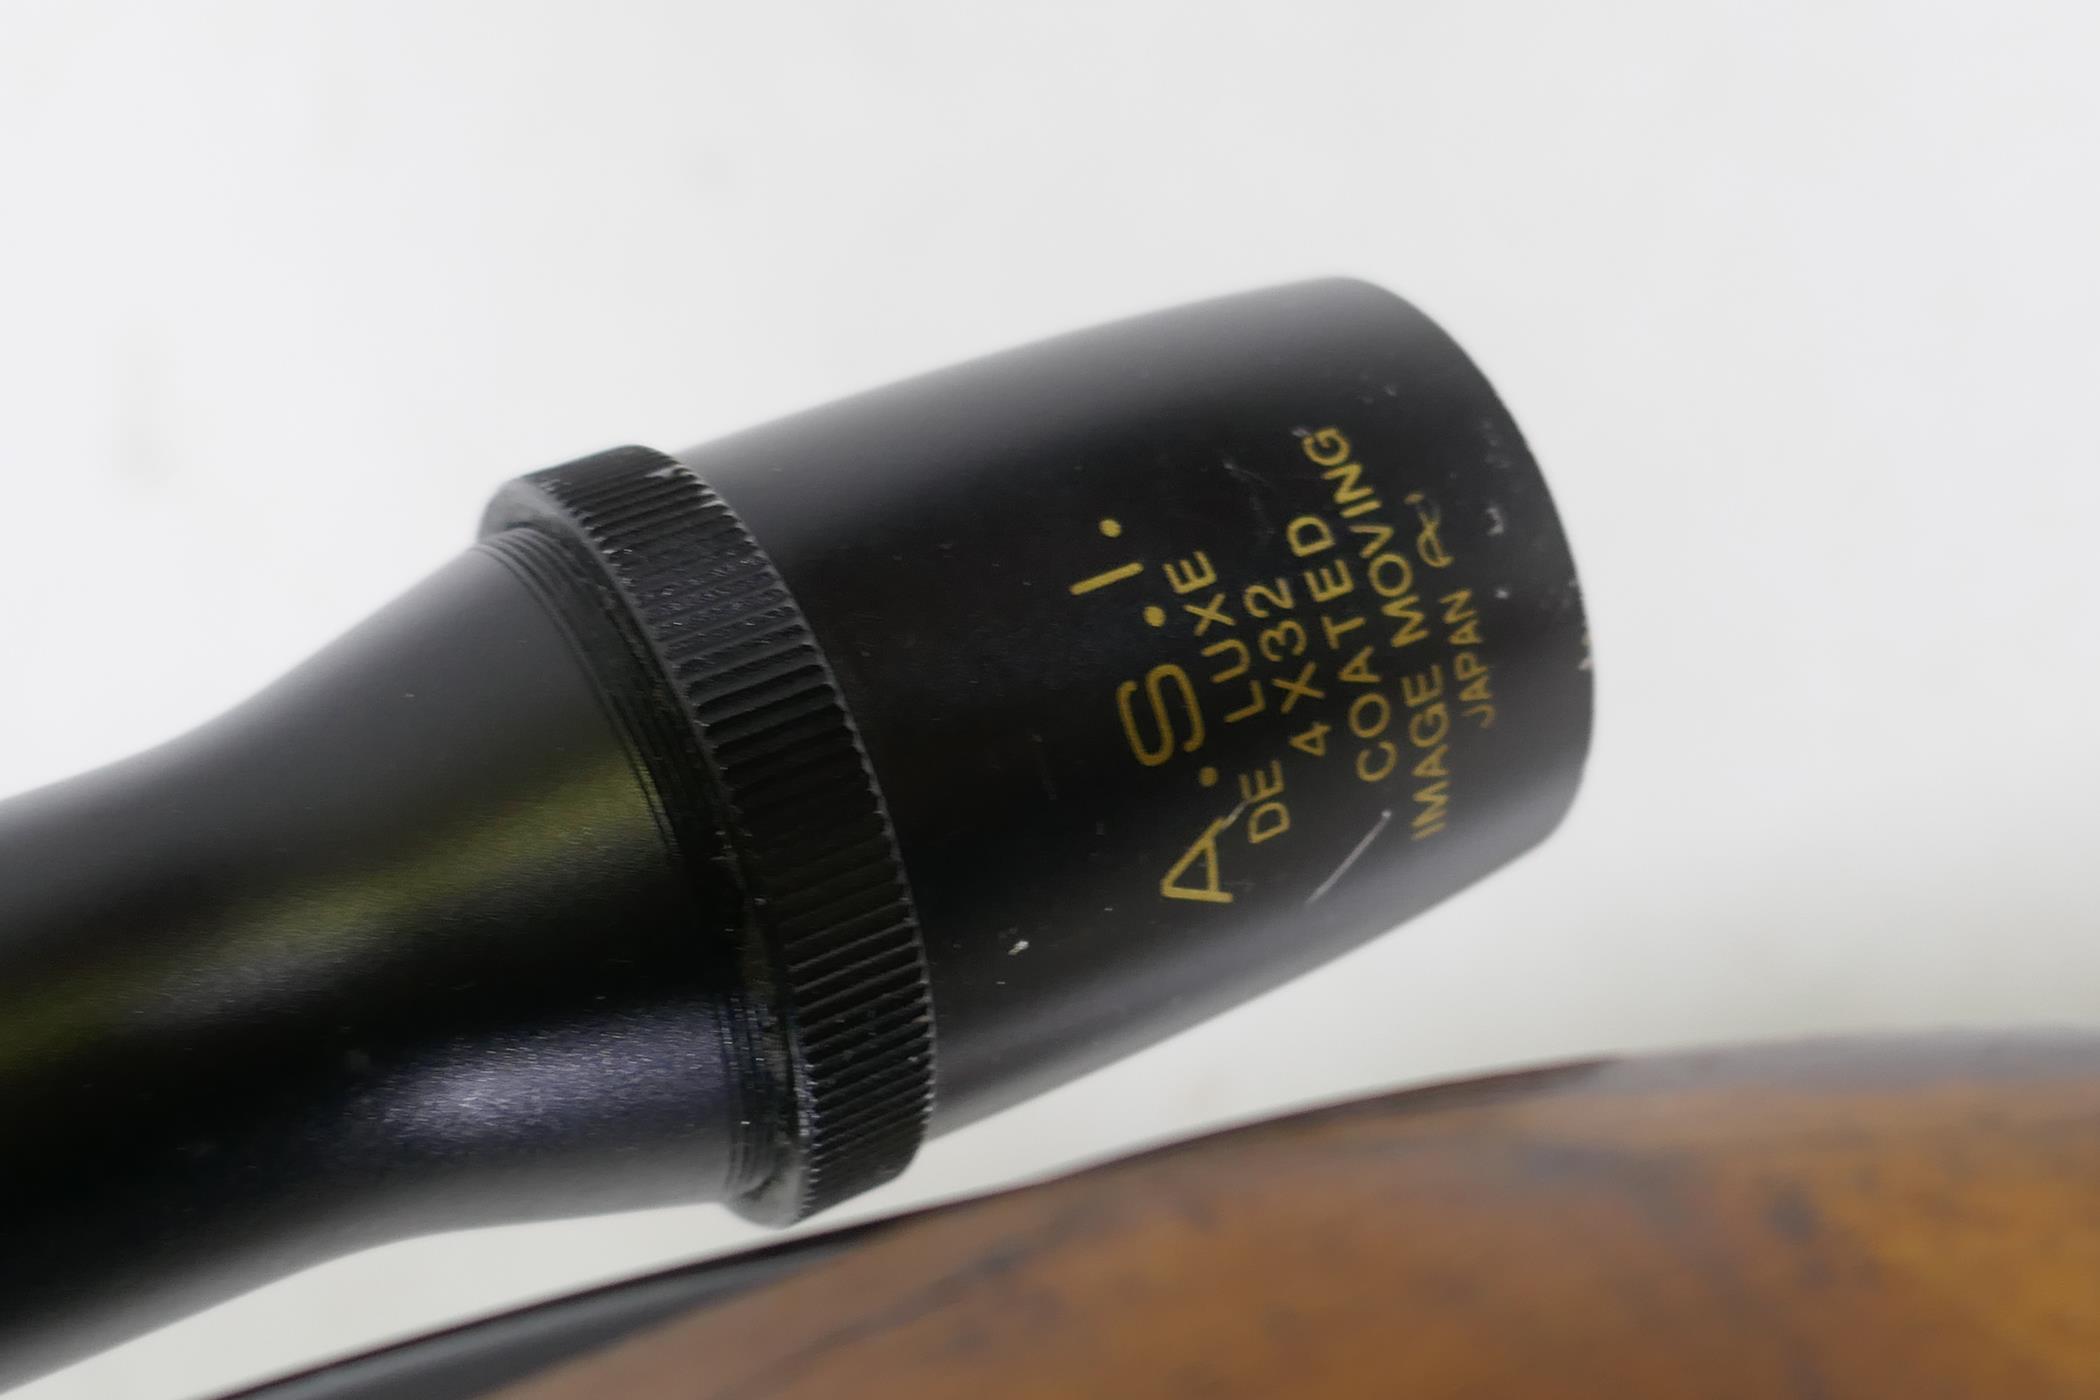 A BSA Airsporter underlever air rifle with an ASI scope, serial no. GD2343E - Image 5 of 6